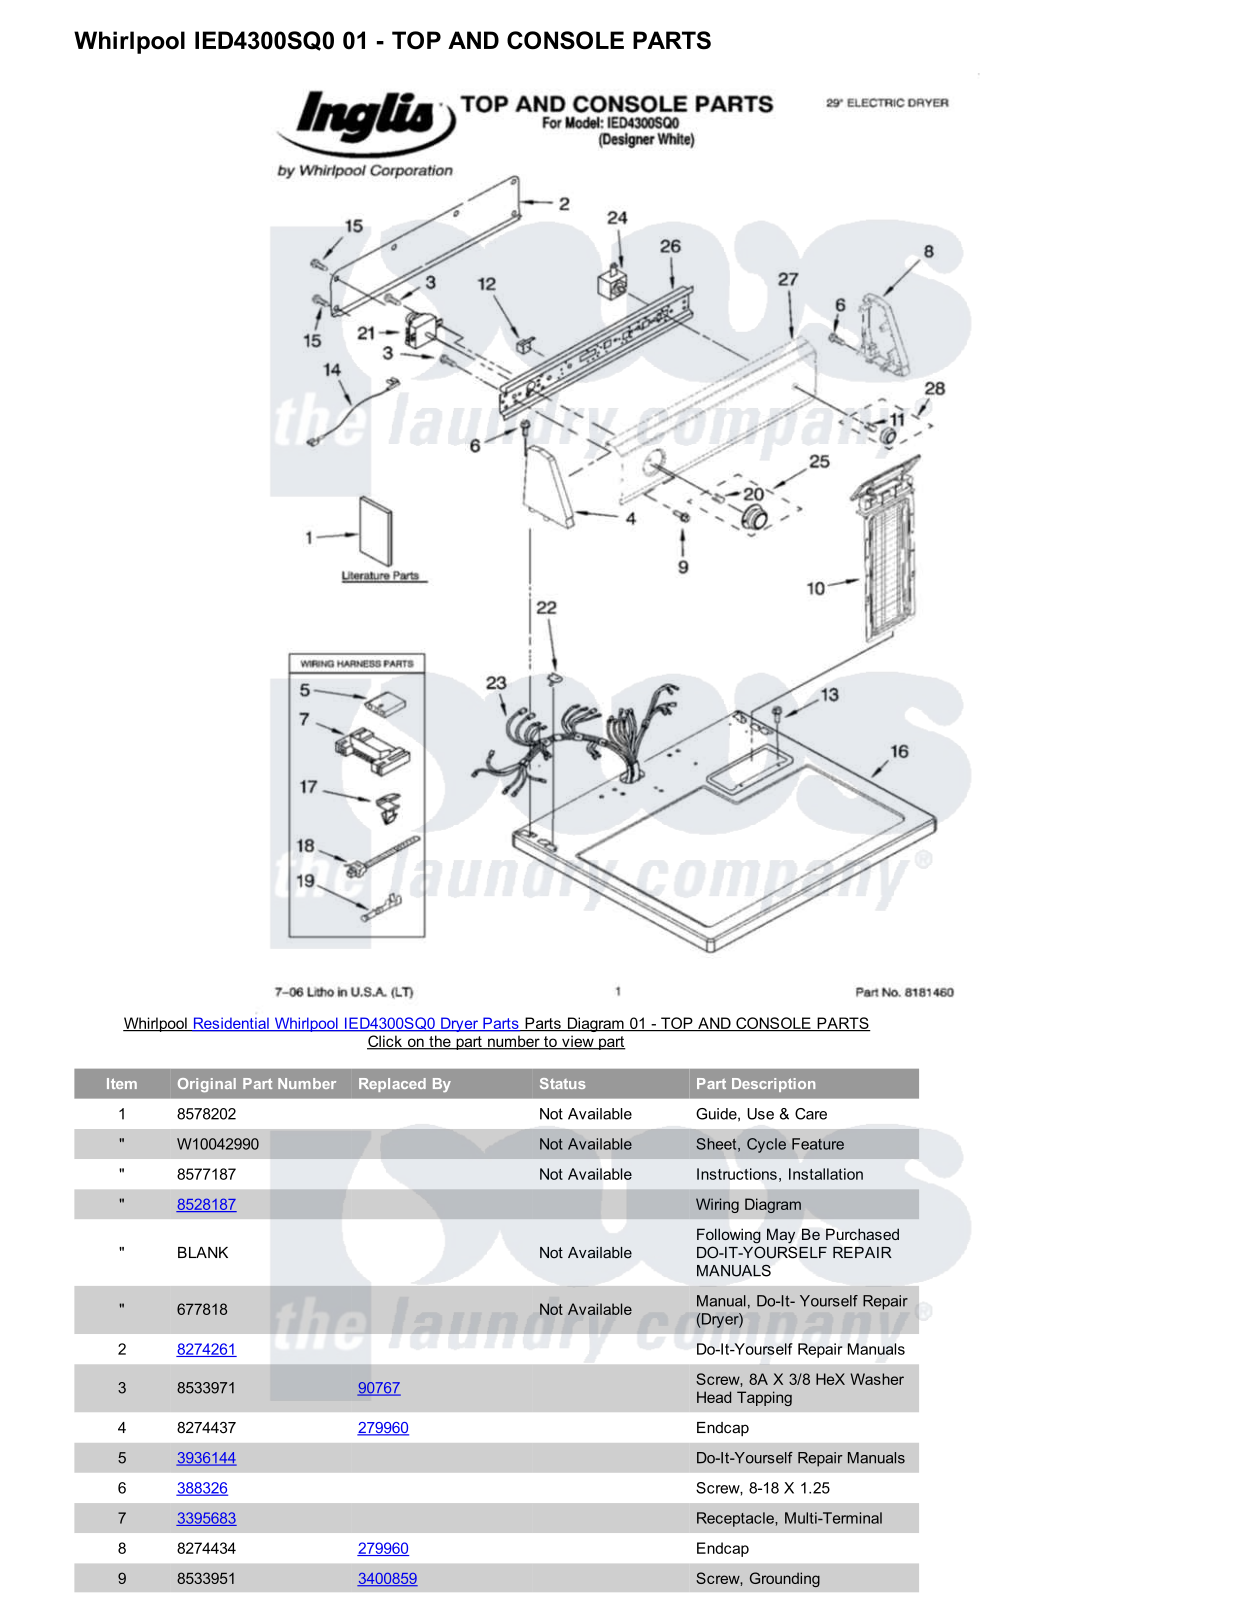 Whirlpool IED4300SQ0 Parts Diagram